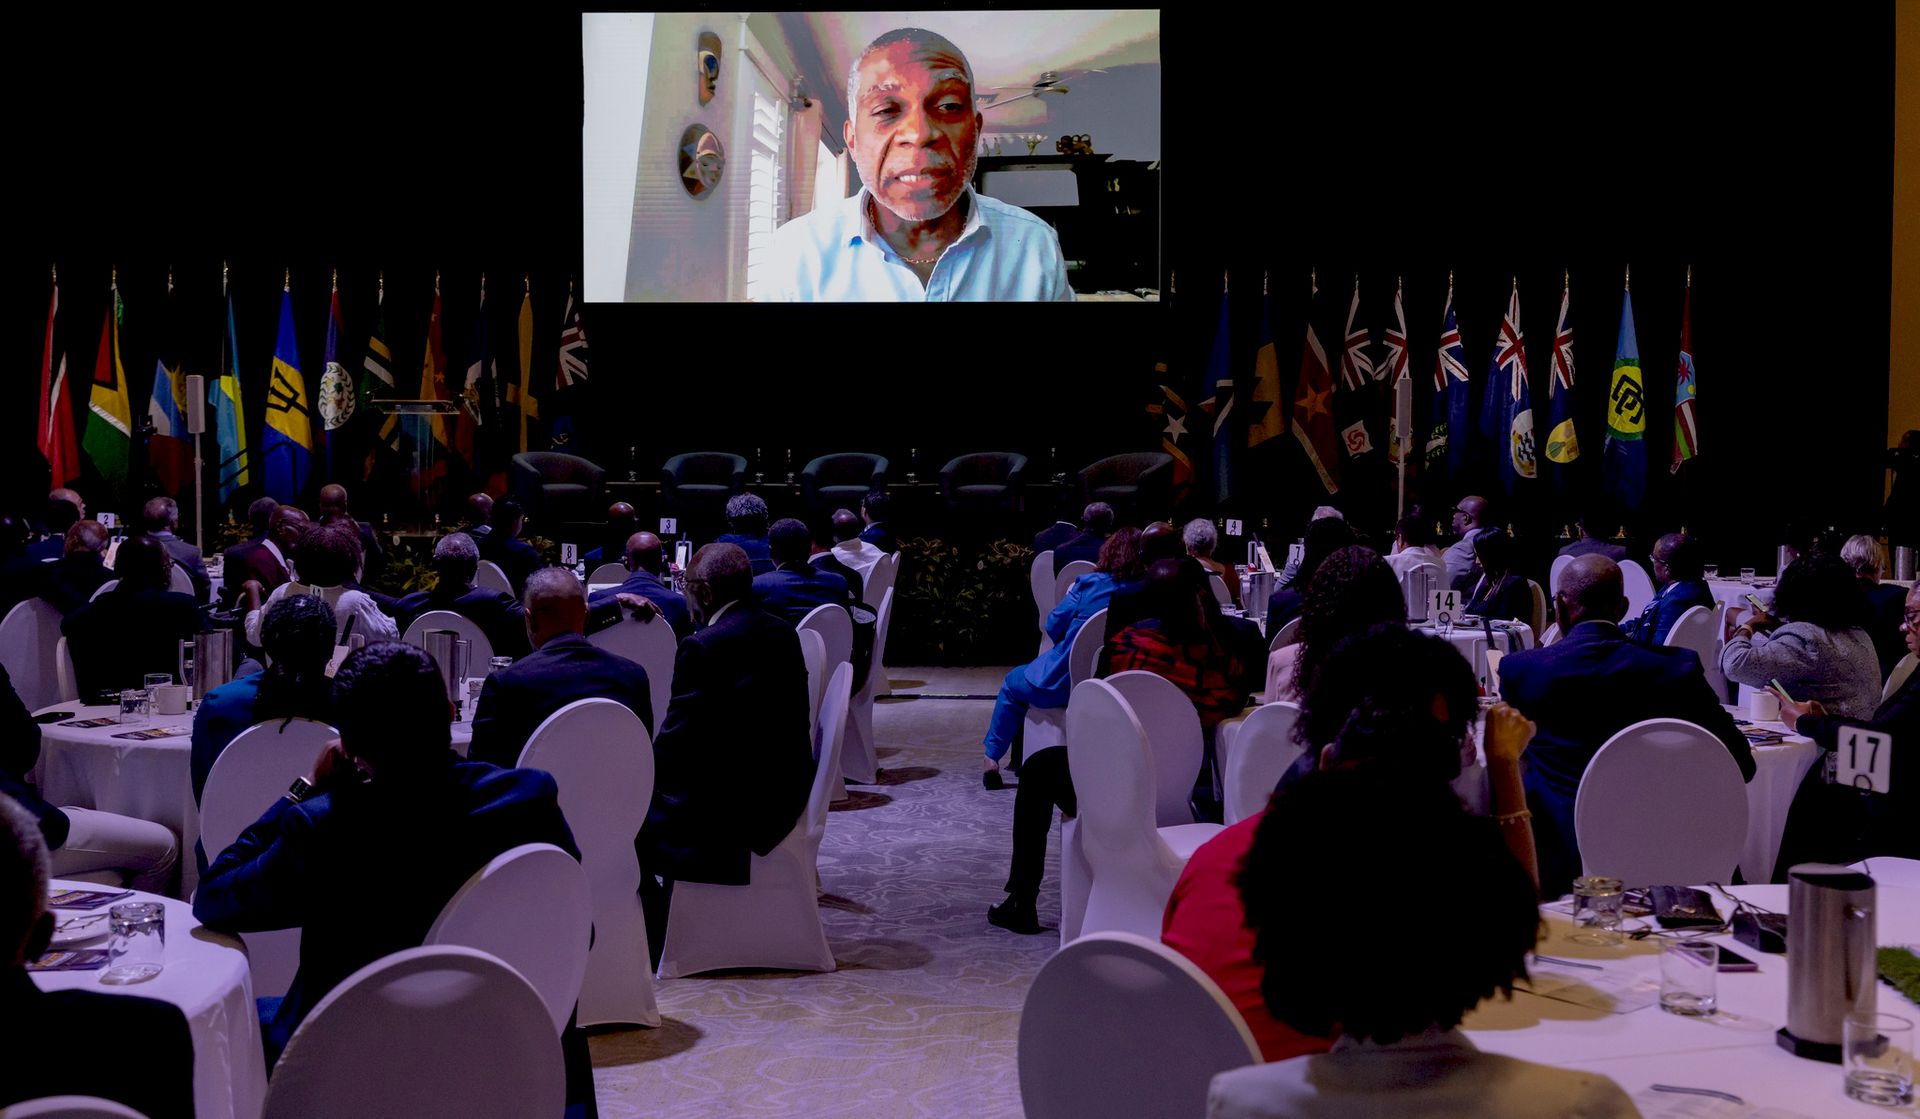 Former West Indies fast bowler Michael Holding speaks via video call during the Caricom Regional Cricket Conference at the Hyatt Regency, Port-of-Spain, yesterday.  CARICOM CRICKET CONFERENCE (Image obtained at guardian.co.tt)